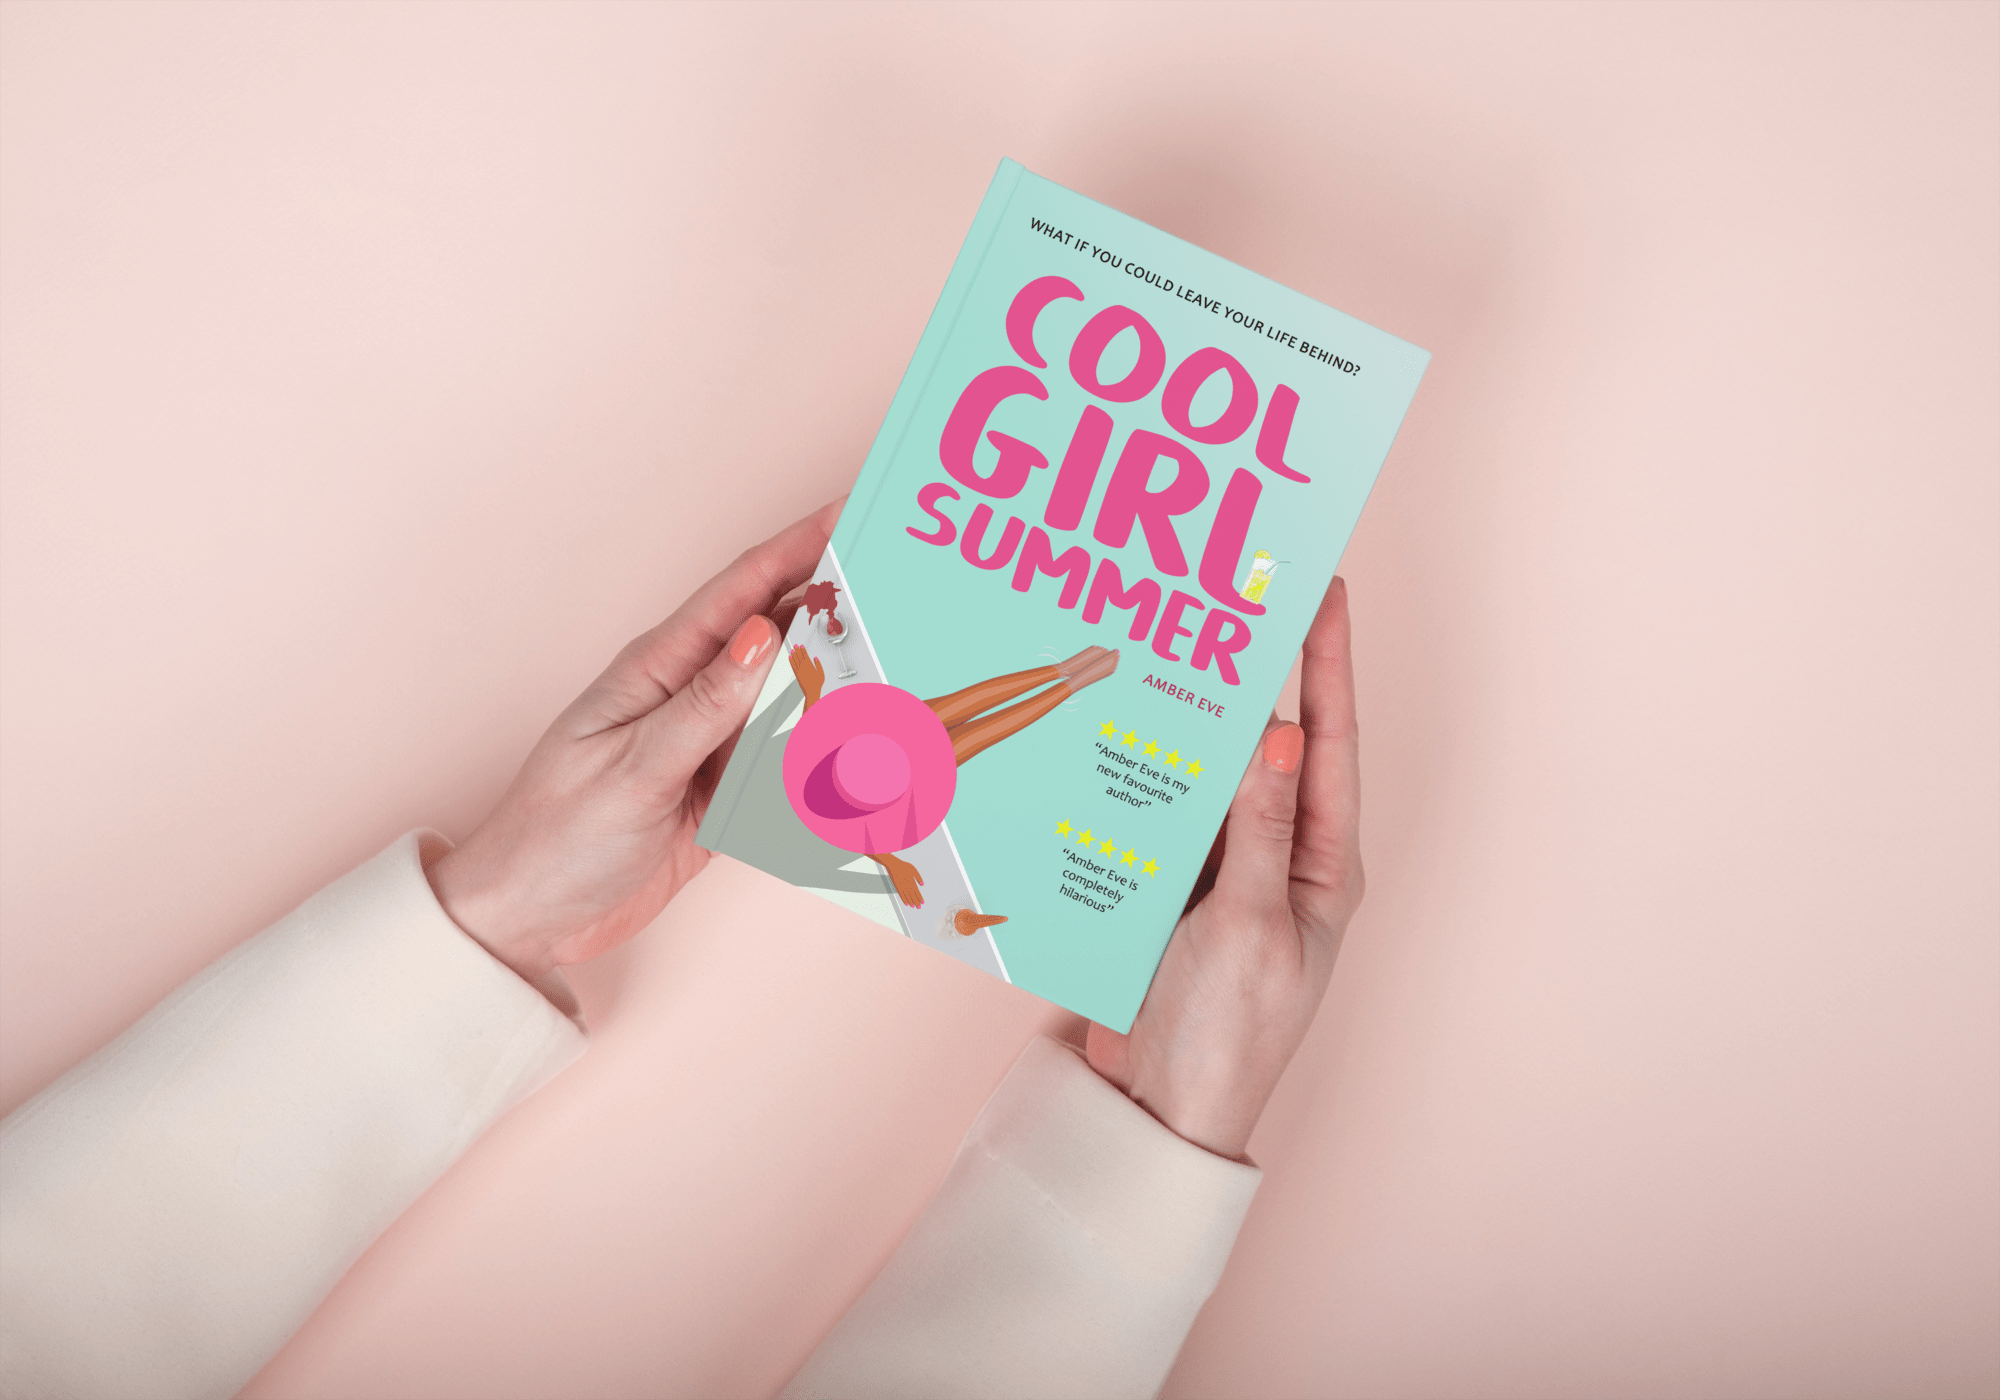 Cool Girl Summer by Amber Eve